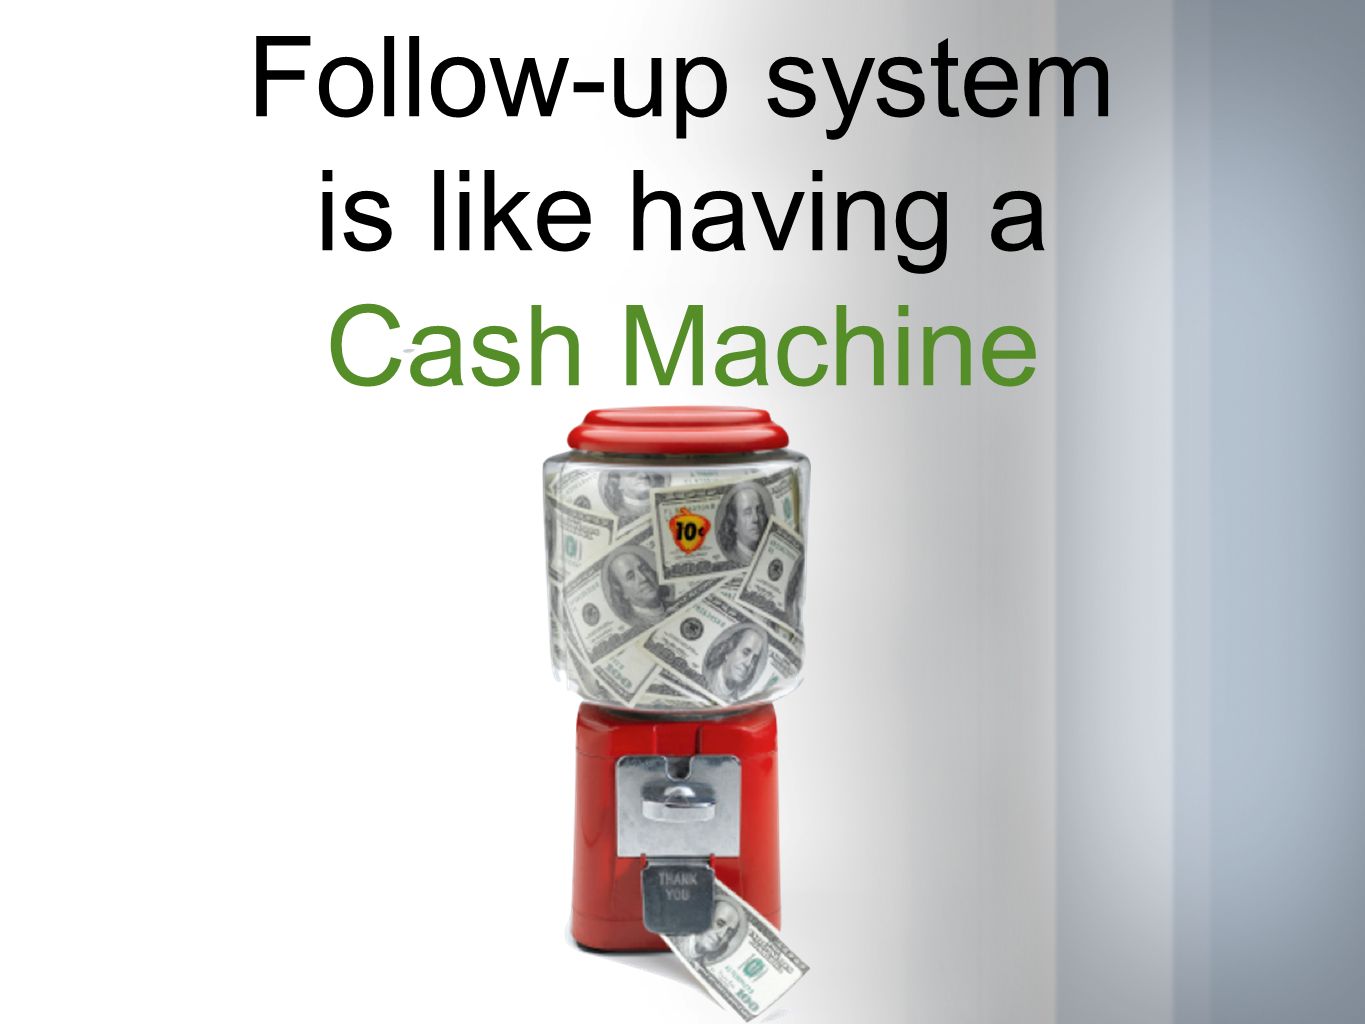 Follow-up system is like having a Cash Machine